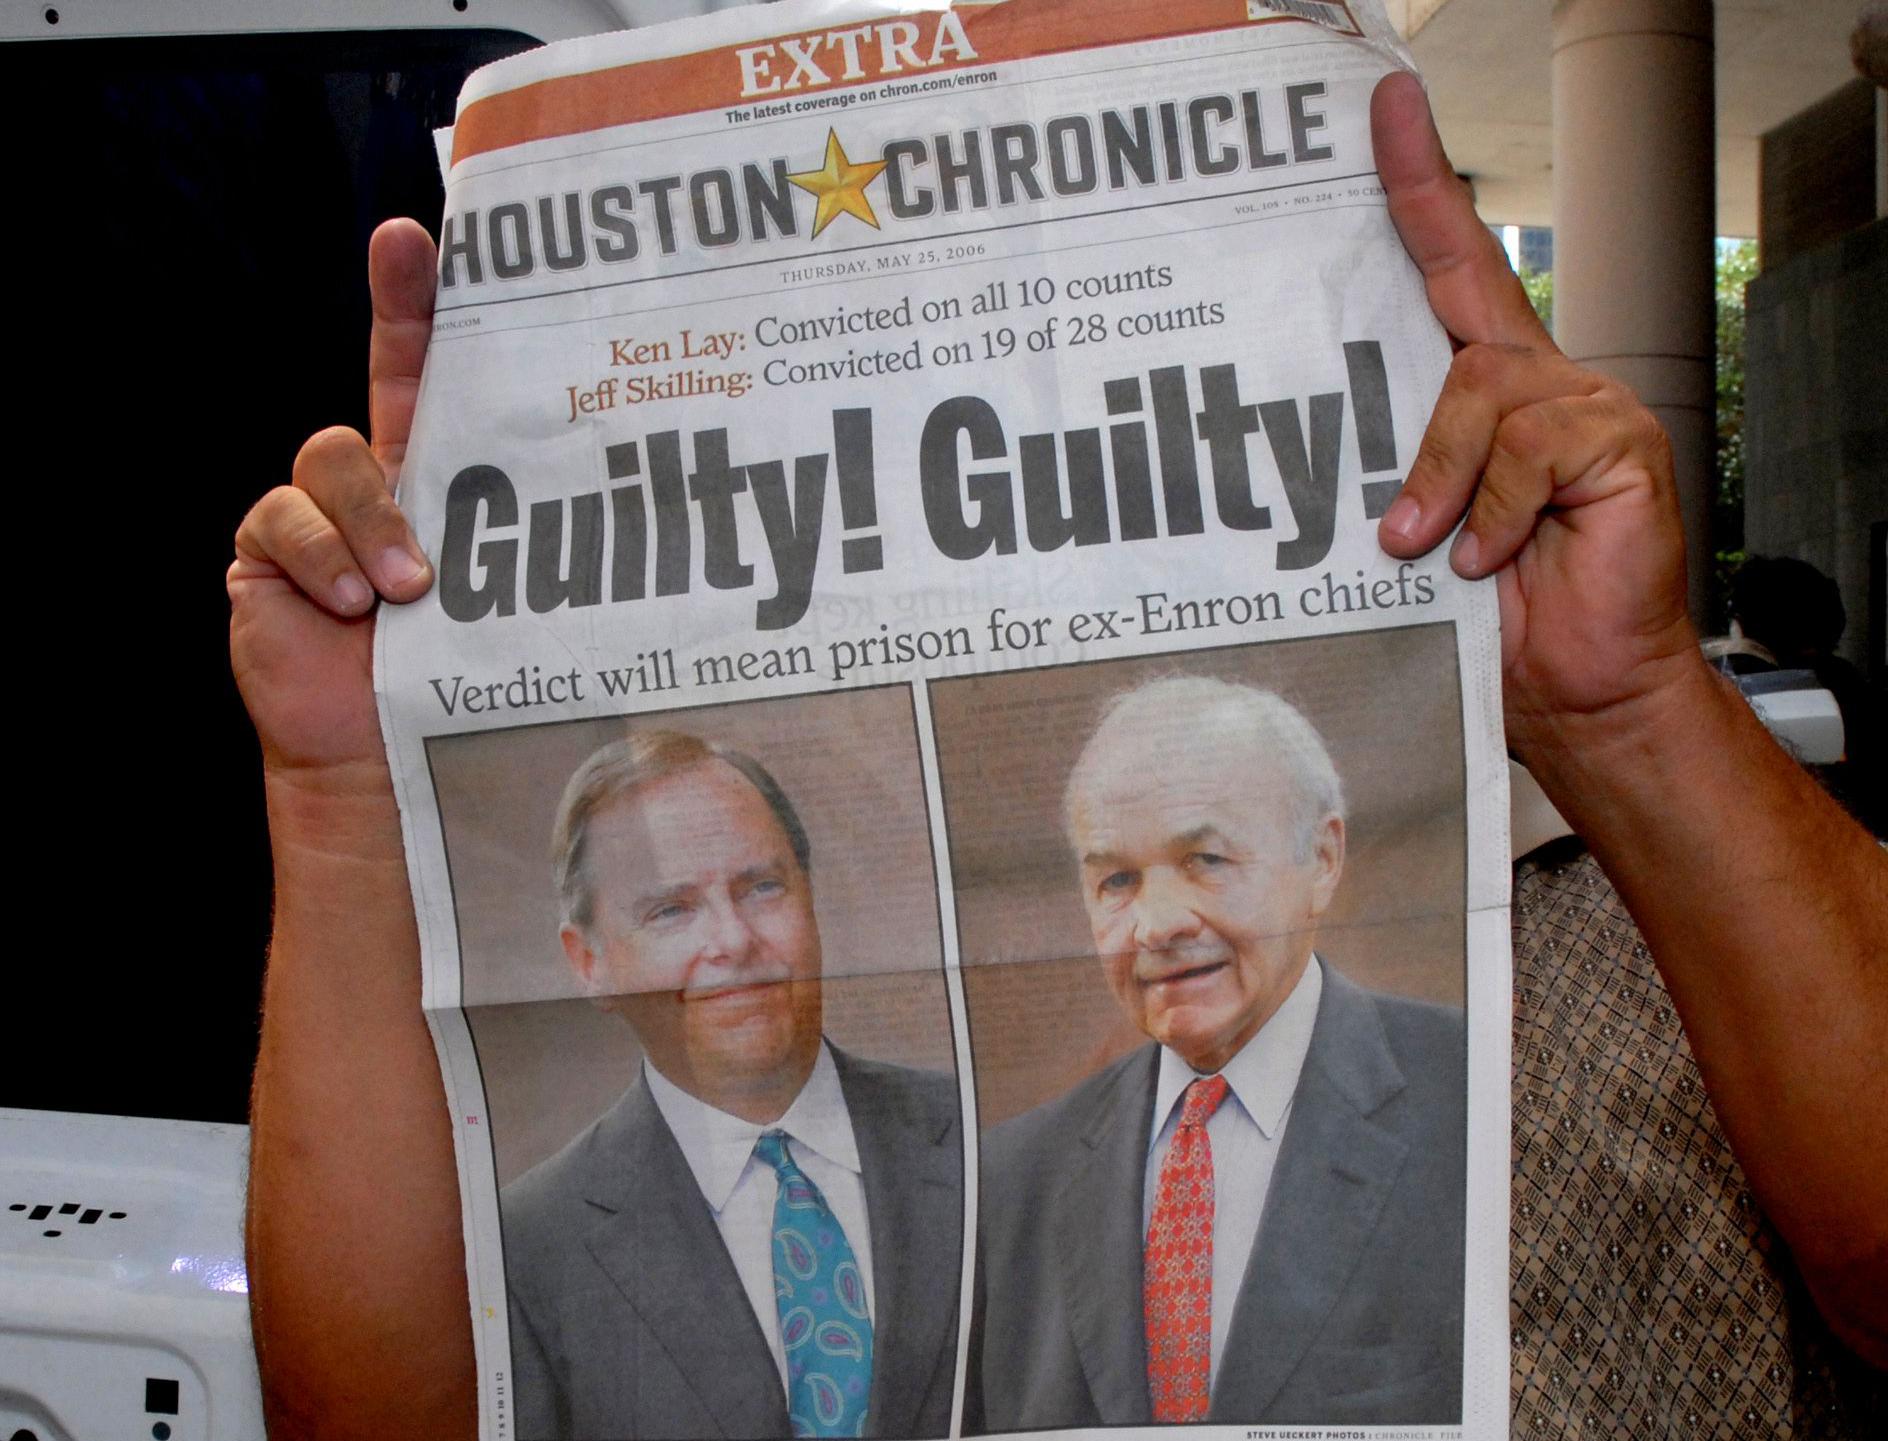 20 years ago, fraud destroyed Enron and ruined lives. Houston